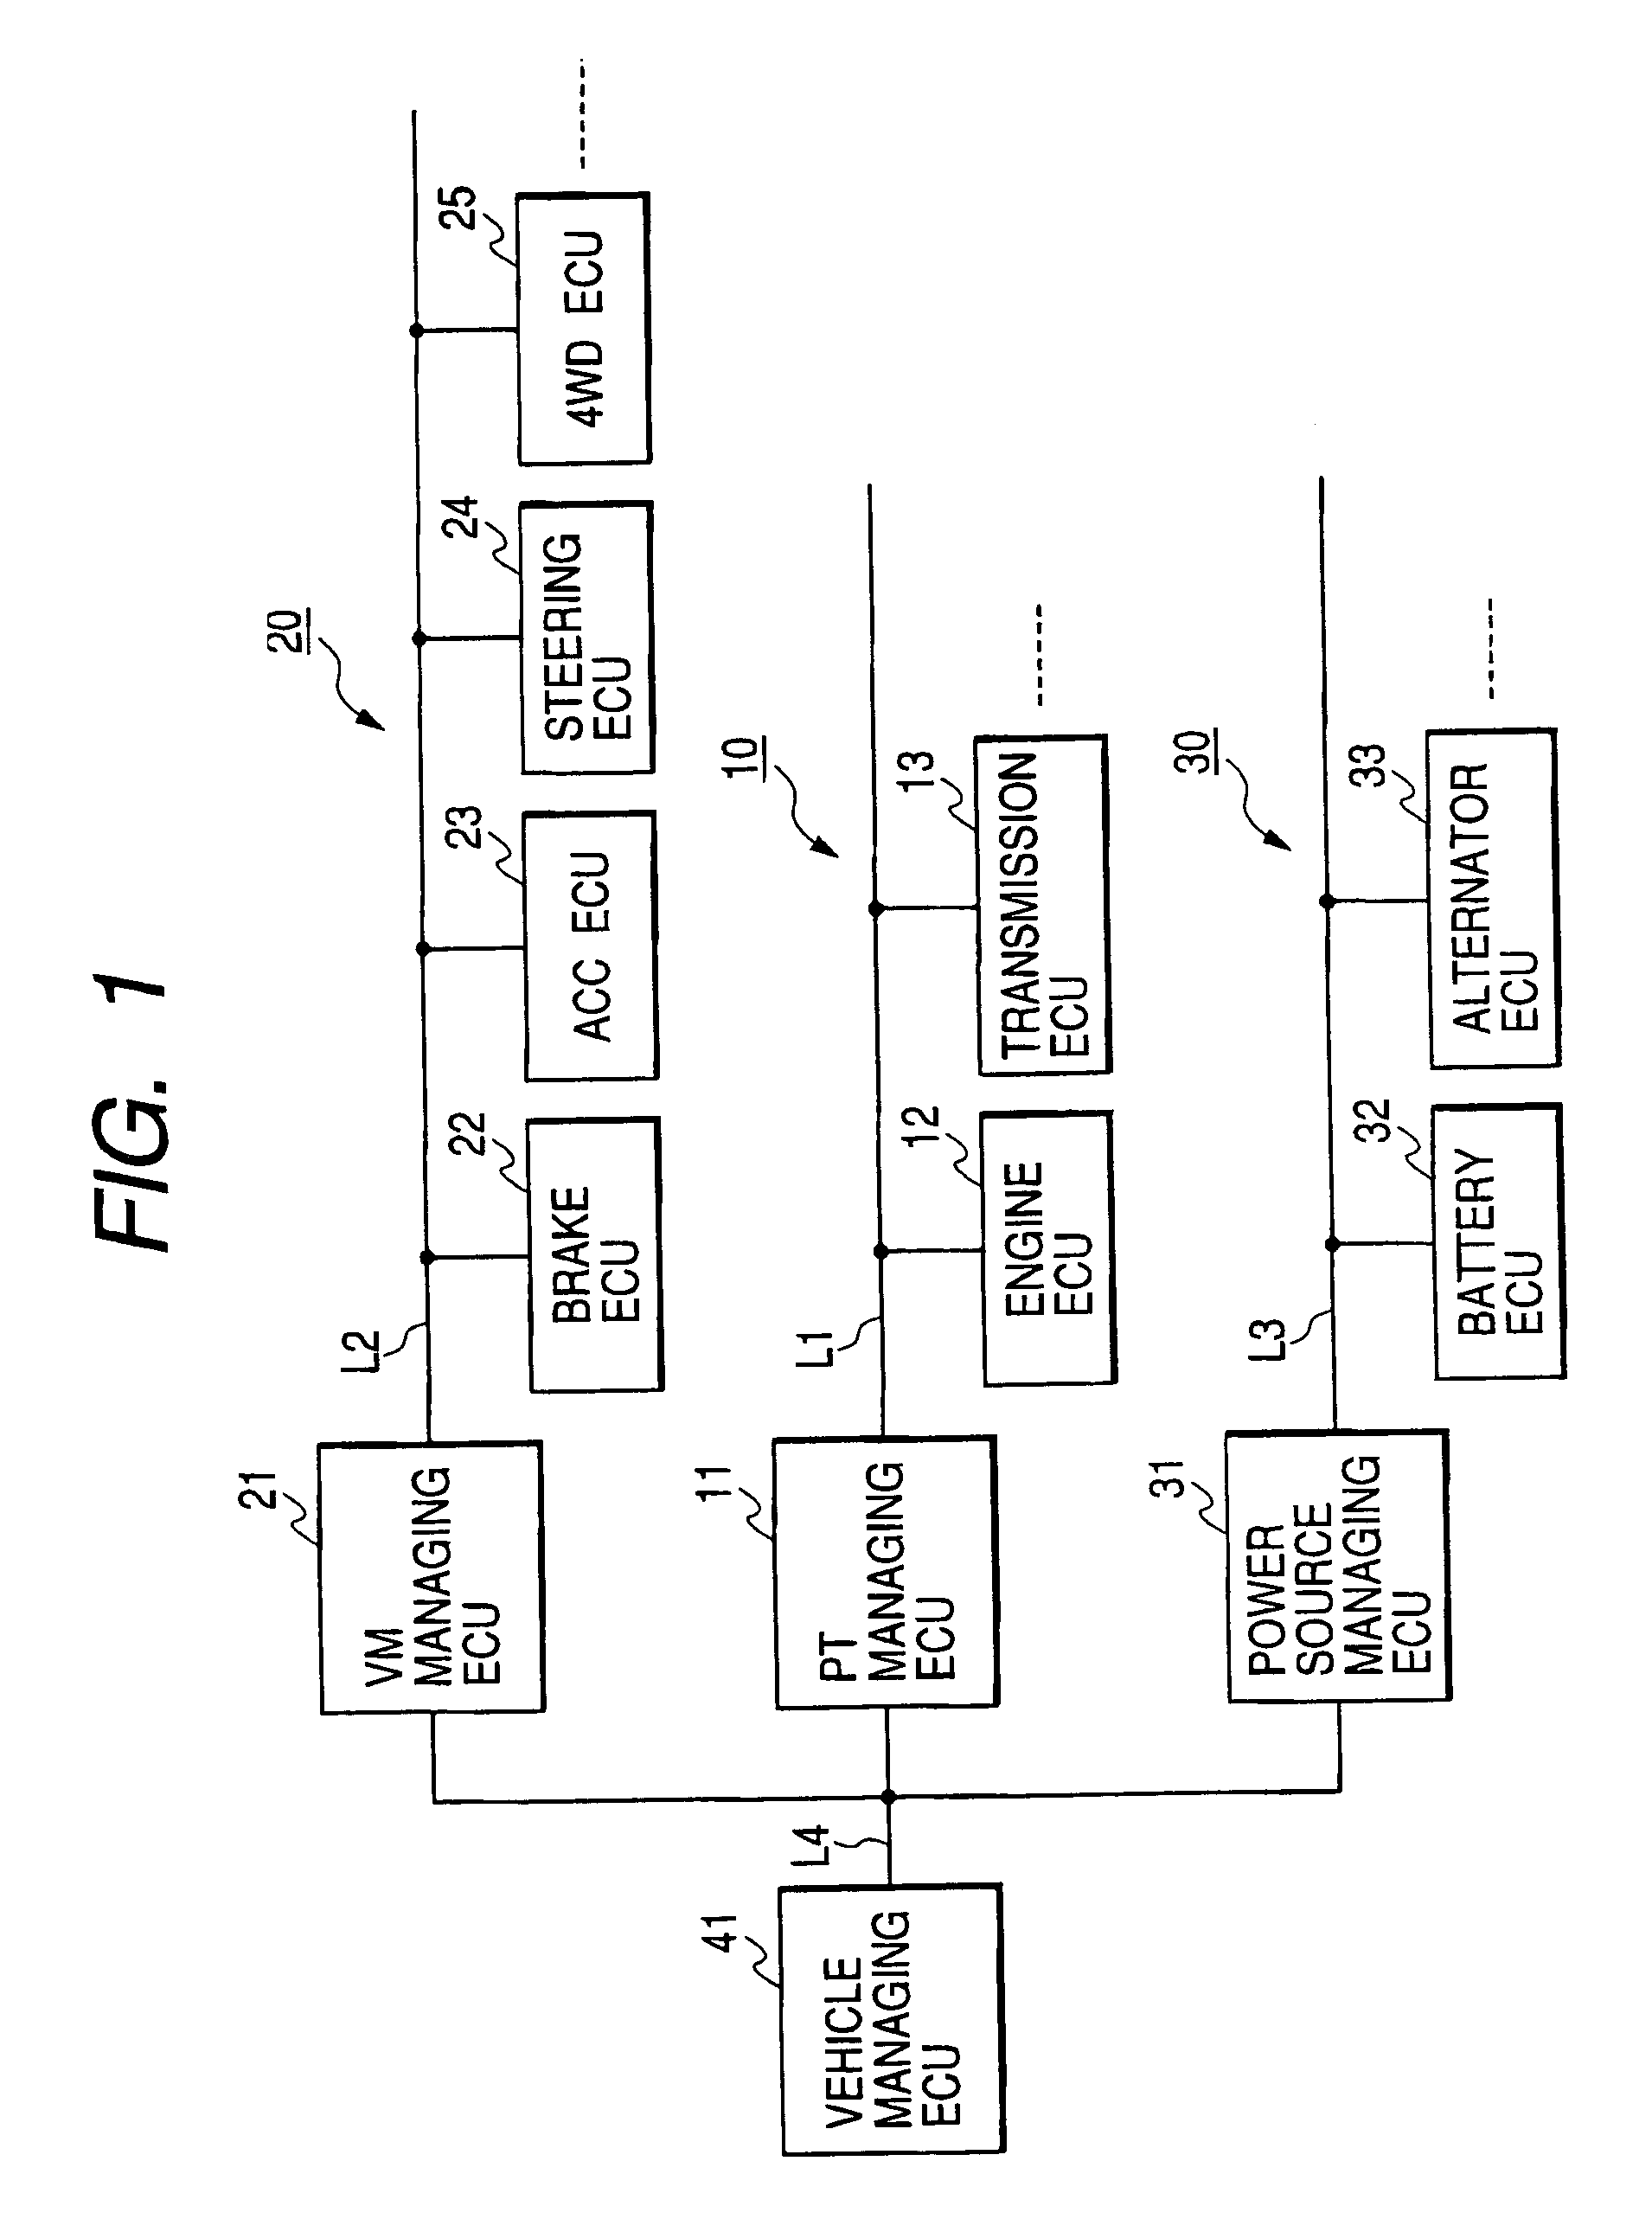 Integrated vehicle control system